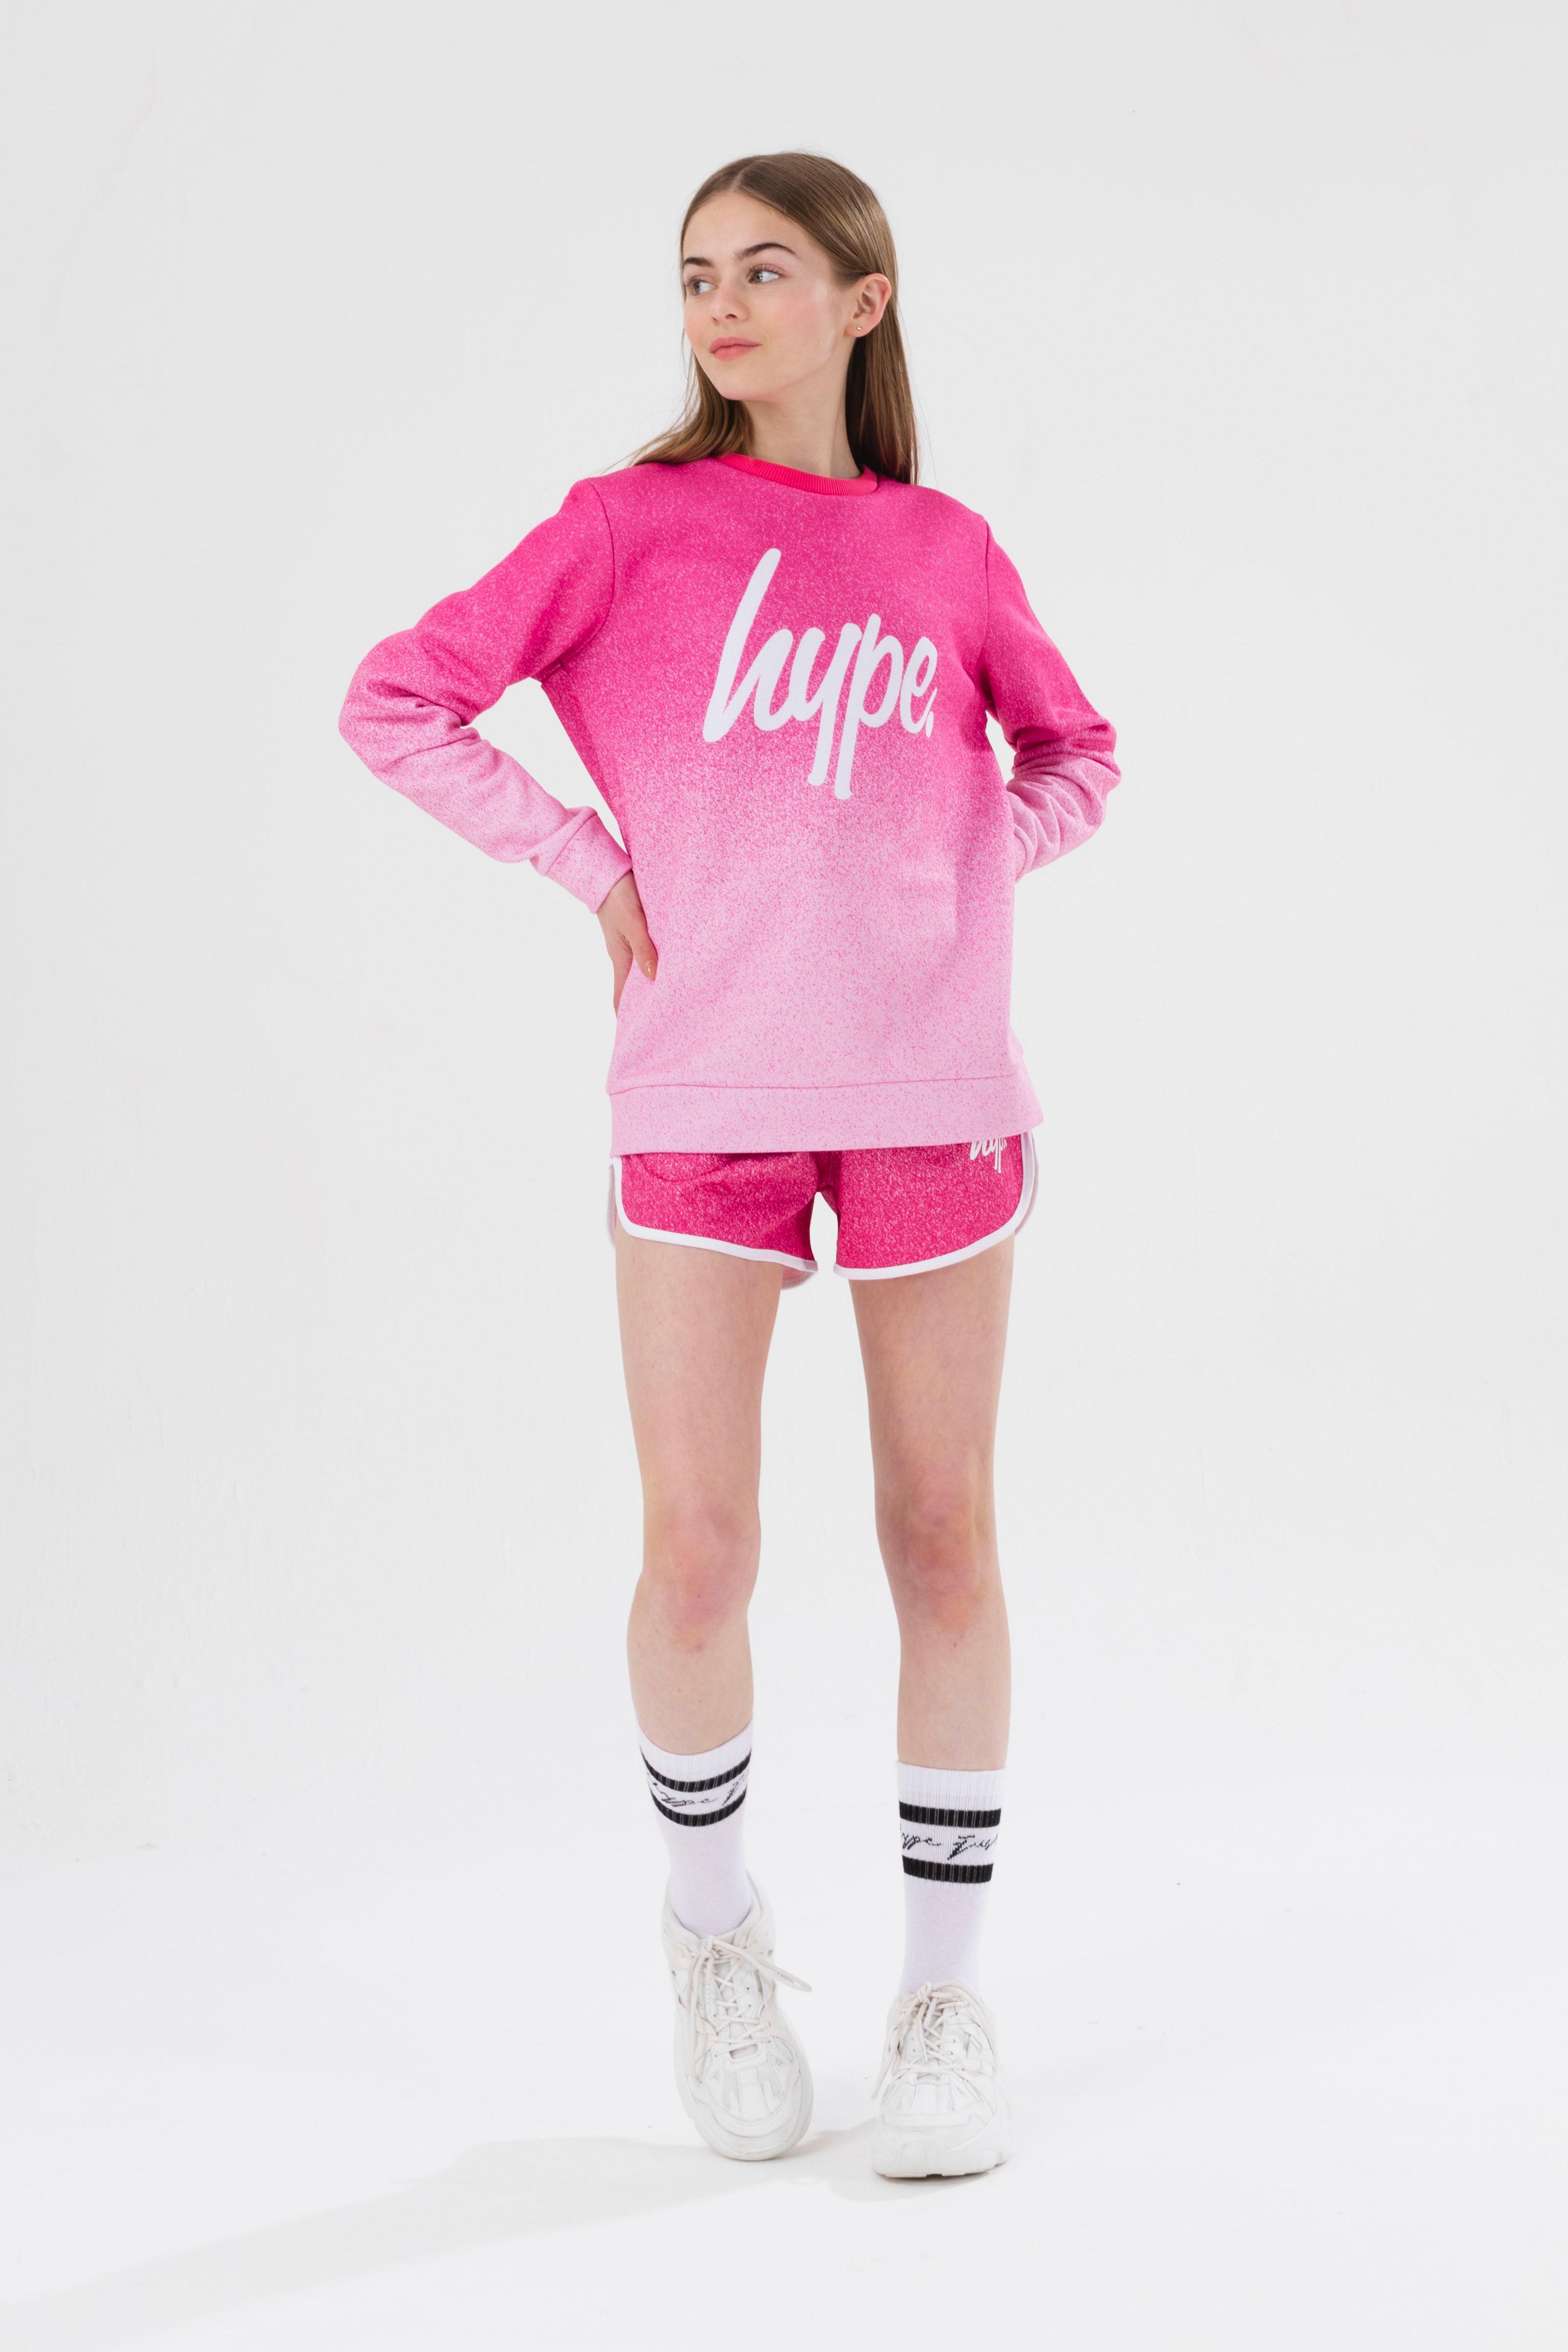 Alternate View 1 of HYPE GIRLS PINK SPECKLE FADE SCRIPT CREW NECK